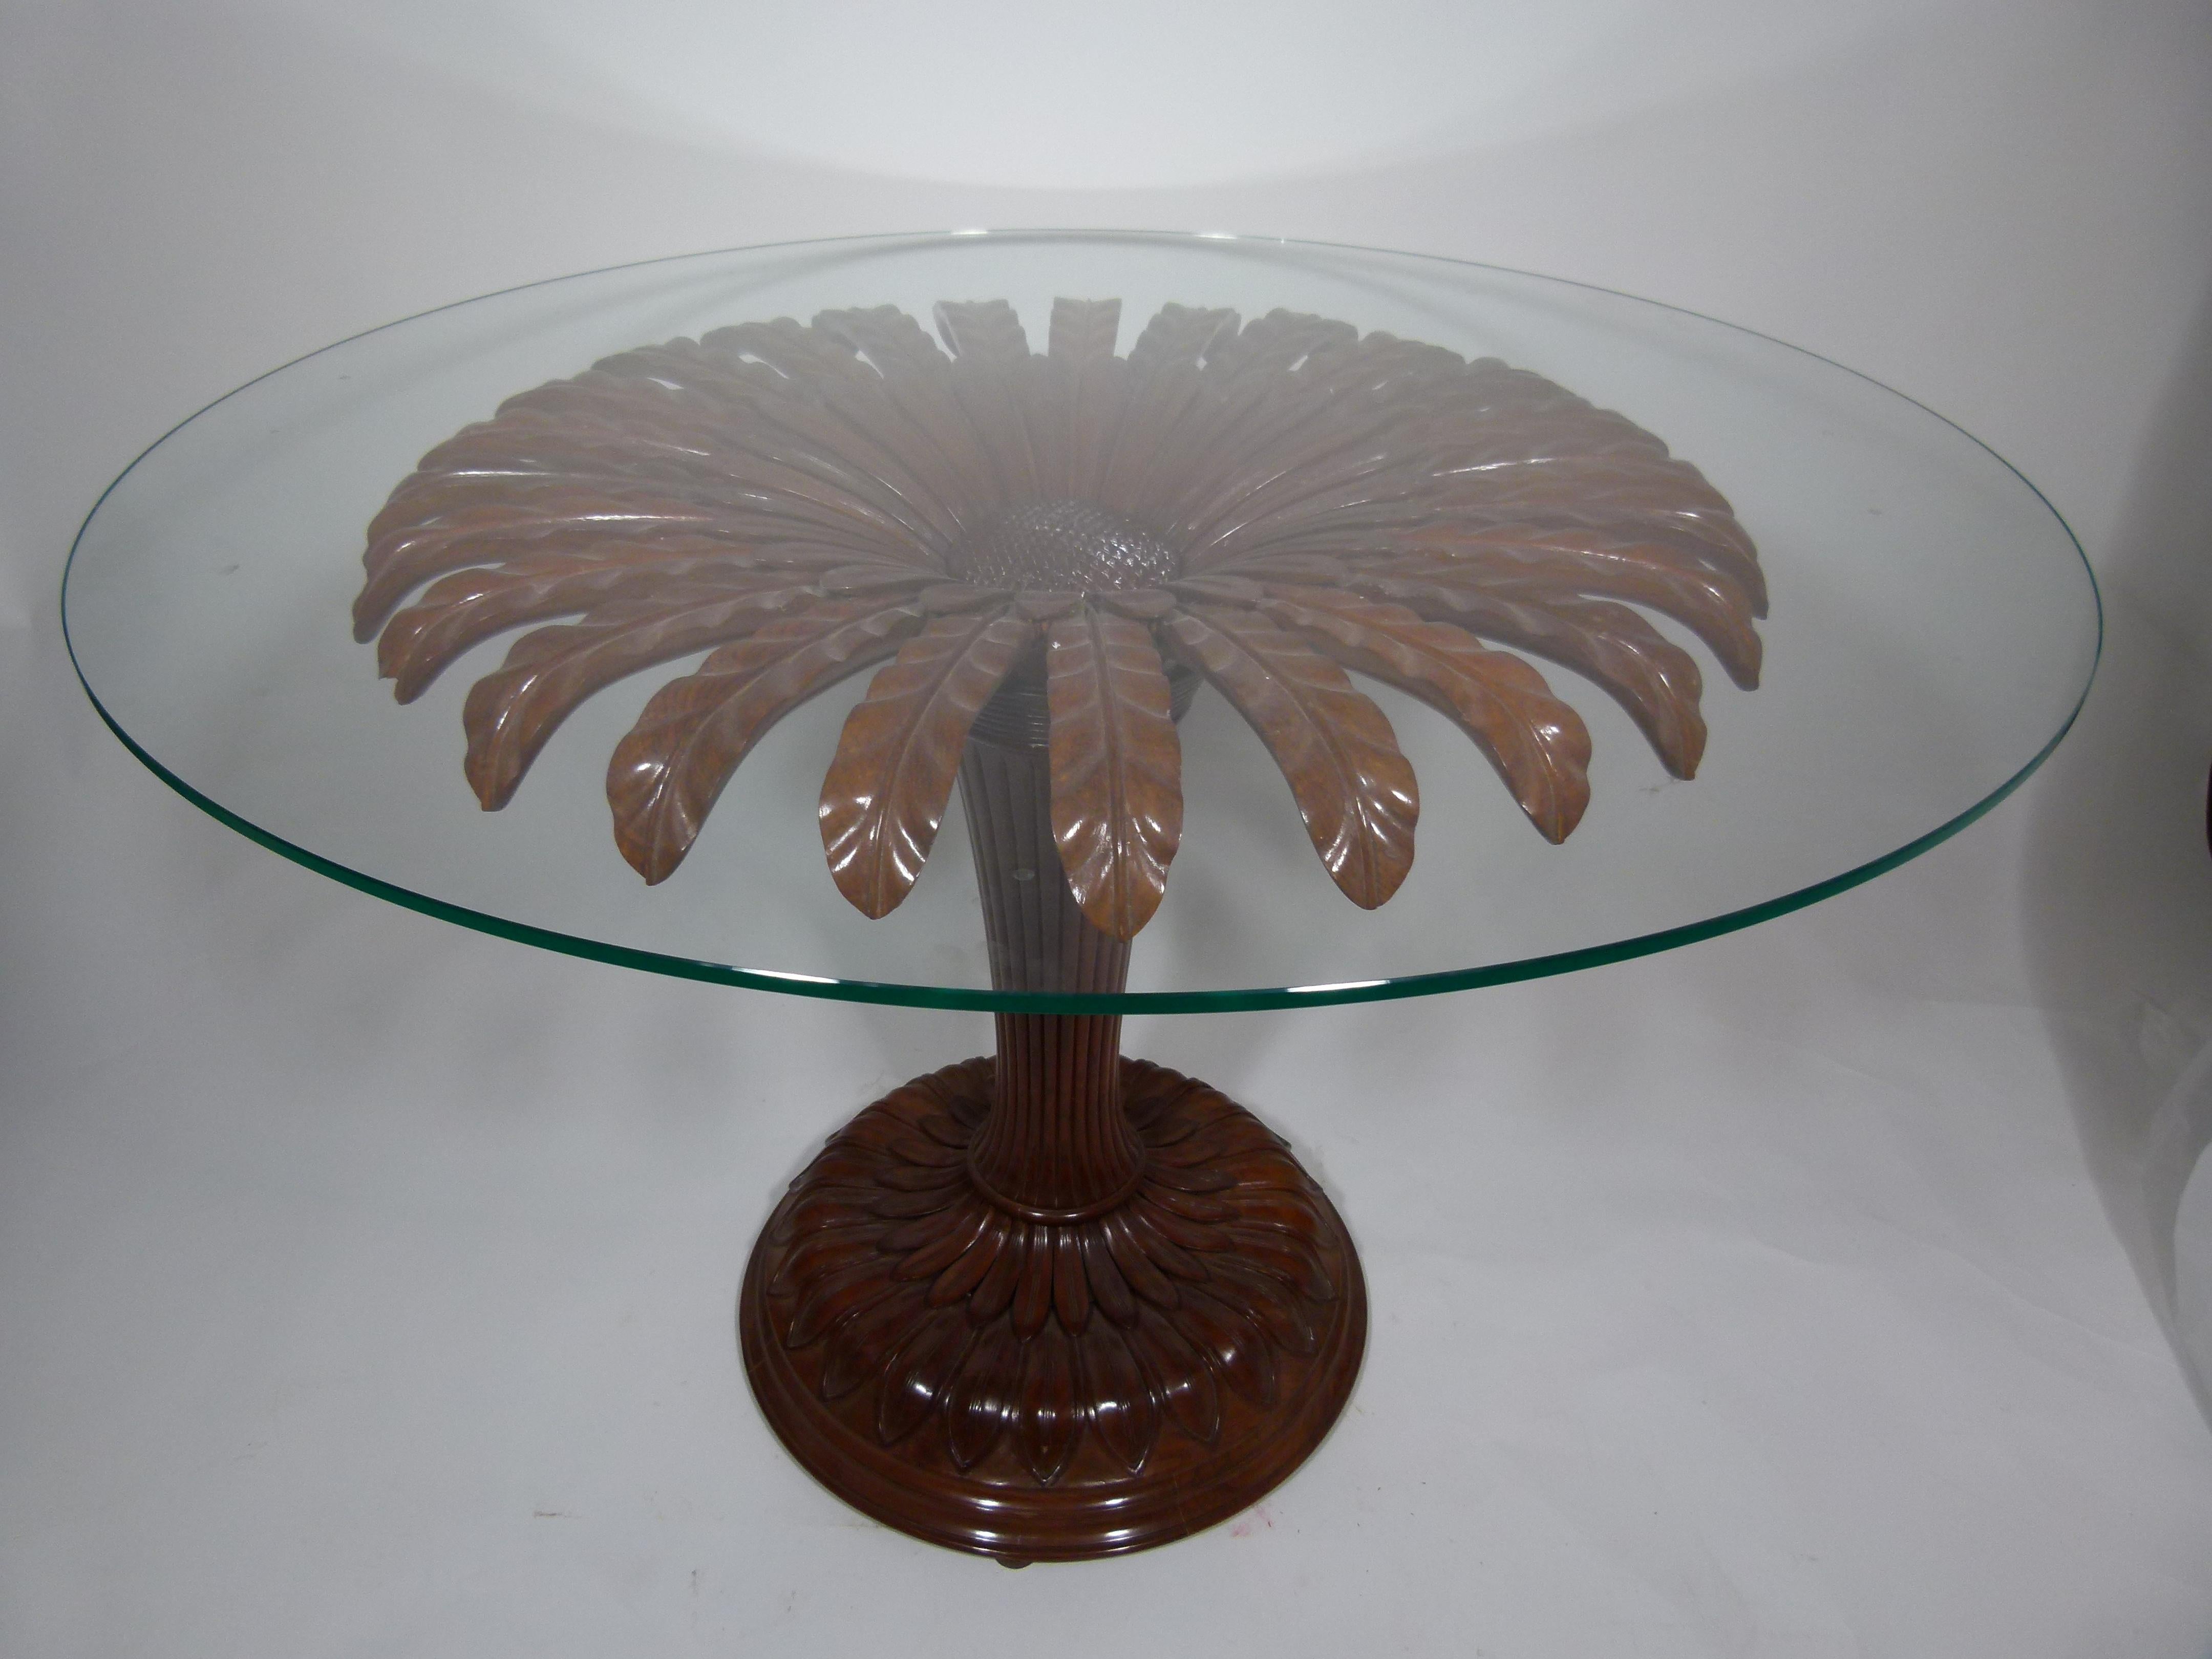 20th century sunflower wooden table with a circular rotary glass top of: 8 mm (0.31 in) thickness and 102 cm (47.24in) diameter.
The base is made of carved wood in form of a sunflower of: 90cm (35.4 in) diameter and 78cm (30.7 in) height.
The